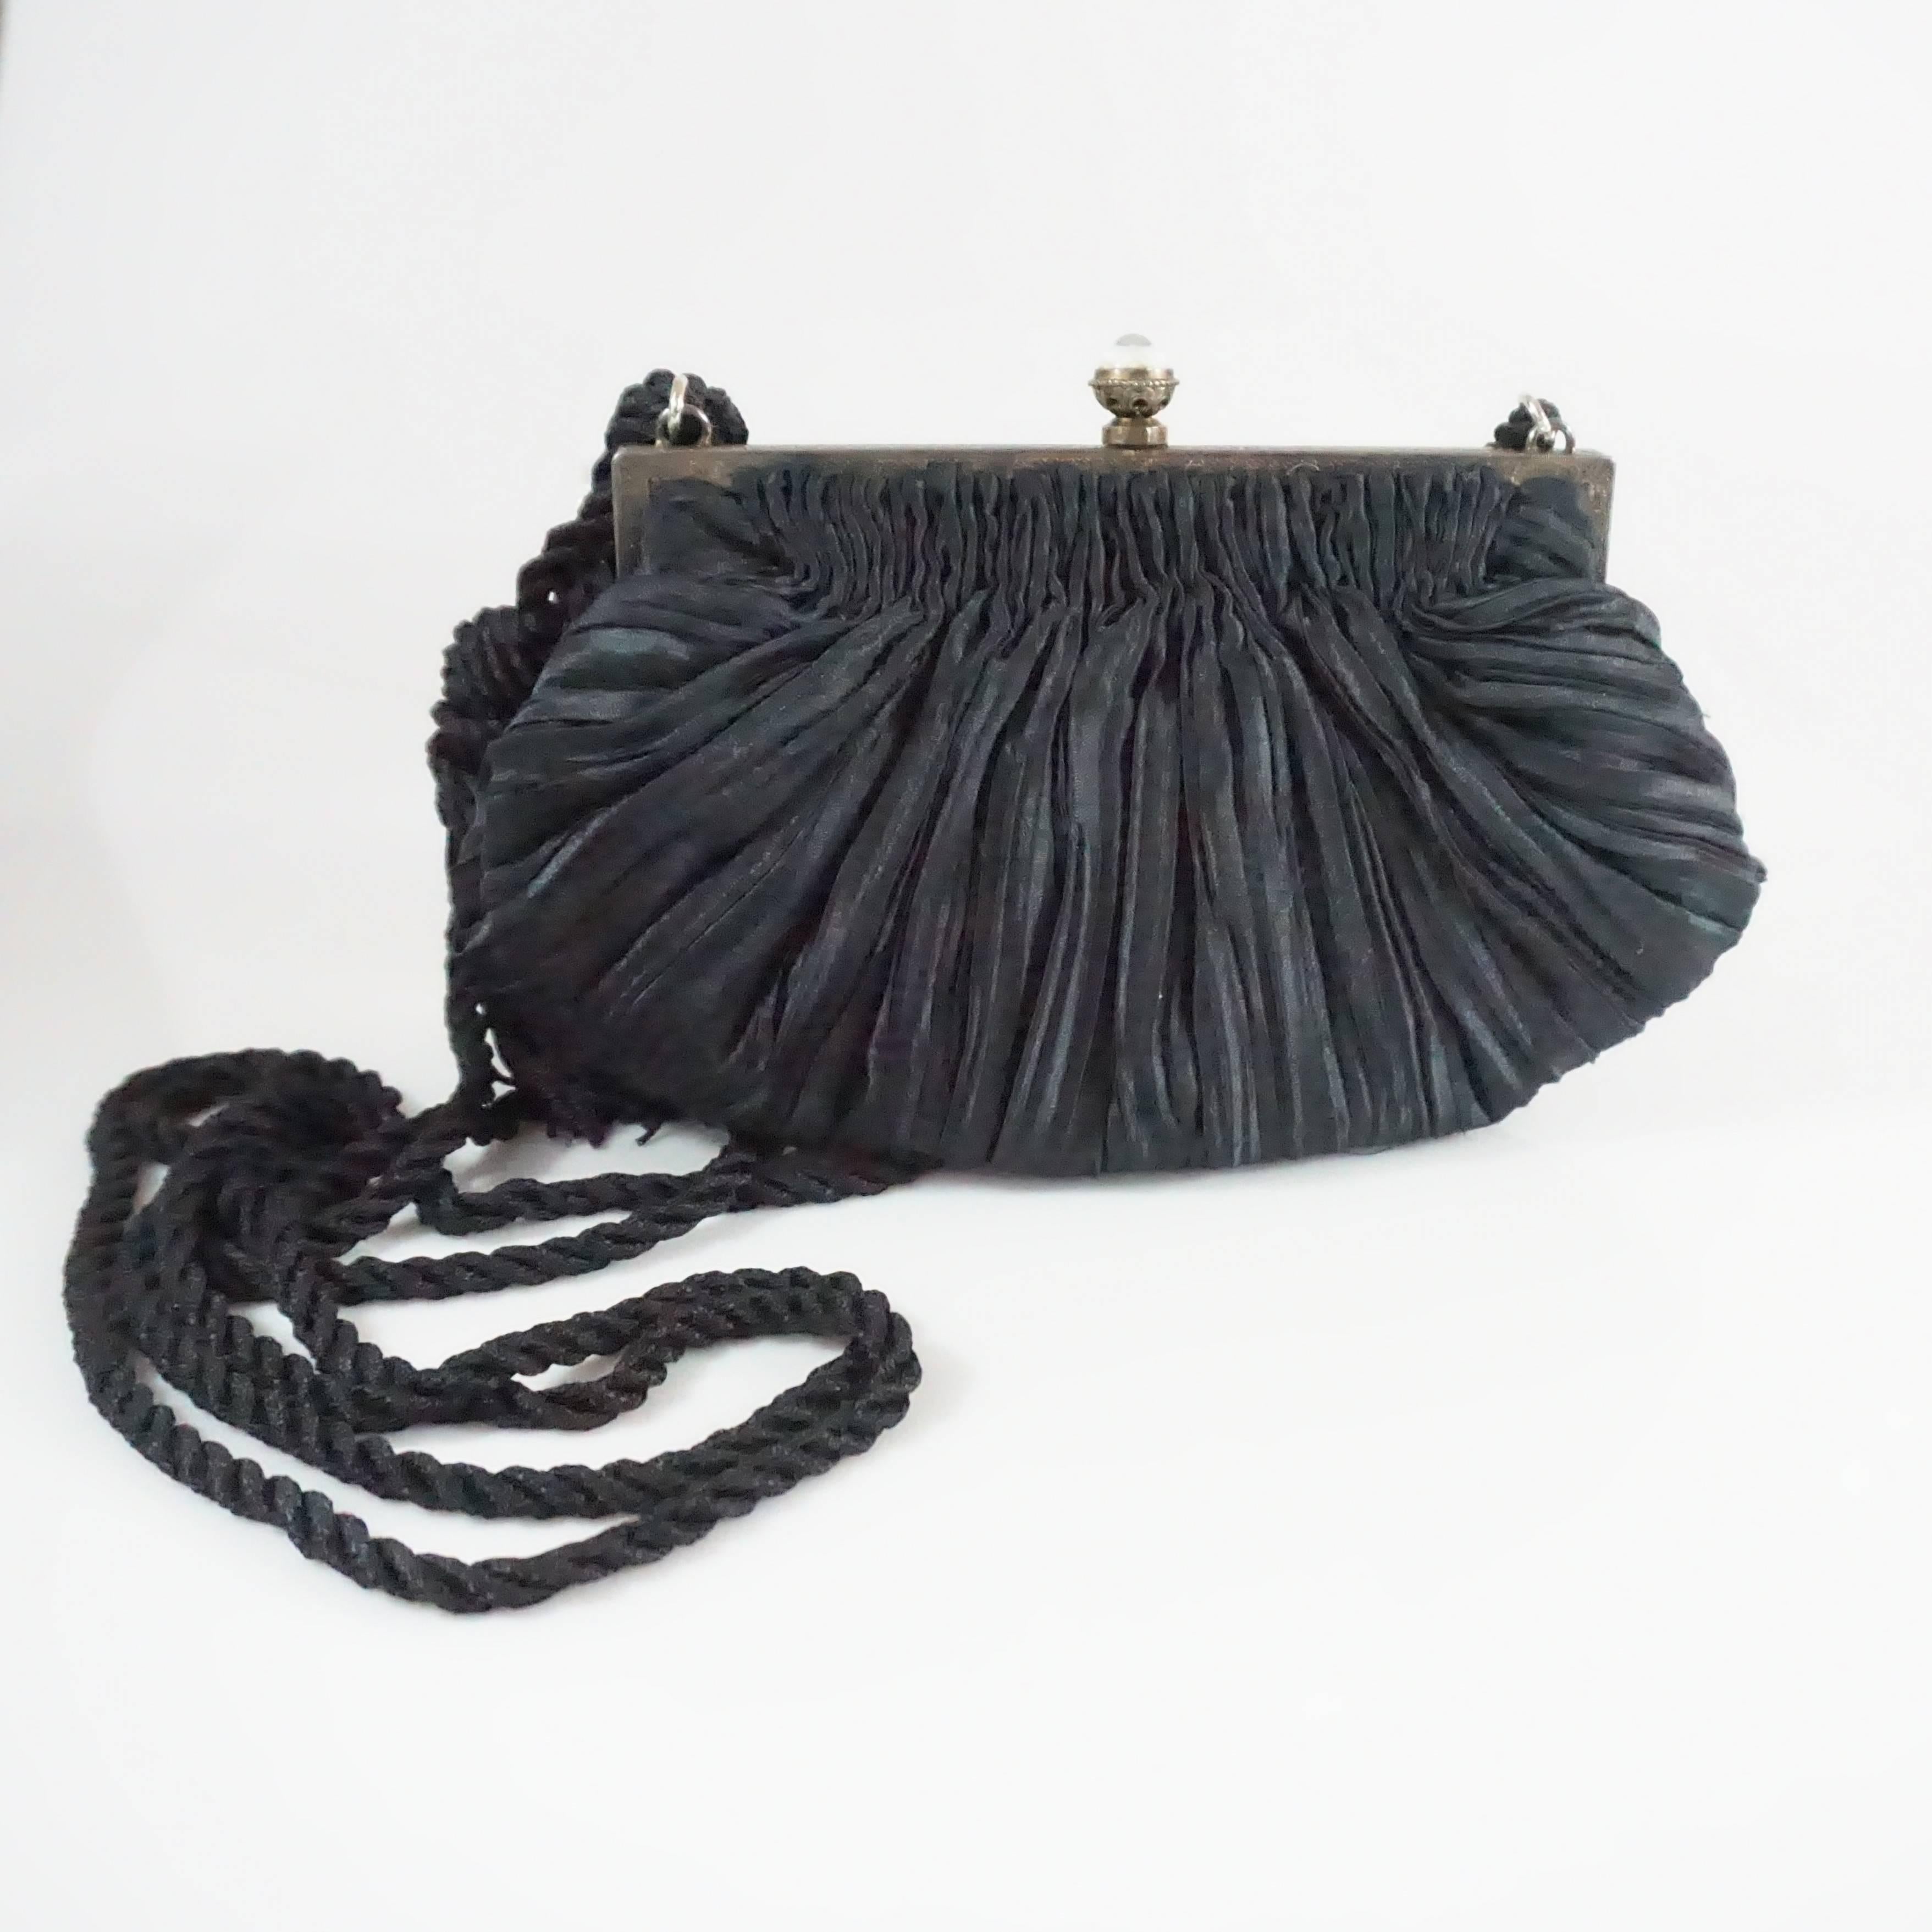 This Revivals bag is made of a black plated satin fabric. The frame of the piece also has etching with an ivory and red enamel design and small graphite stones. The bag also features a push clasp, 1 small interior pocket, and a rope strap with